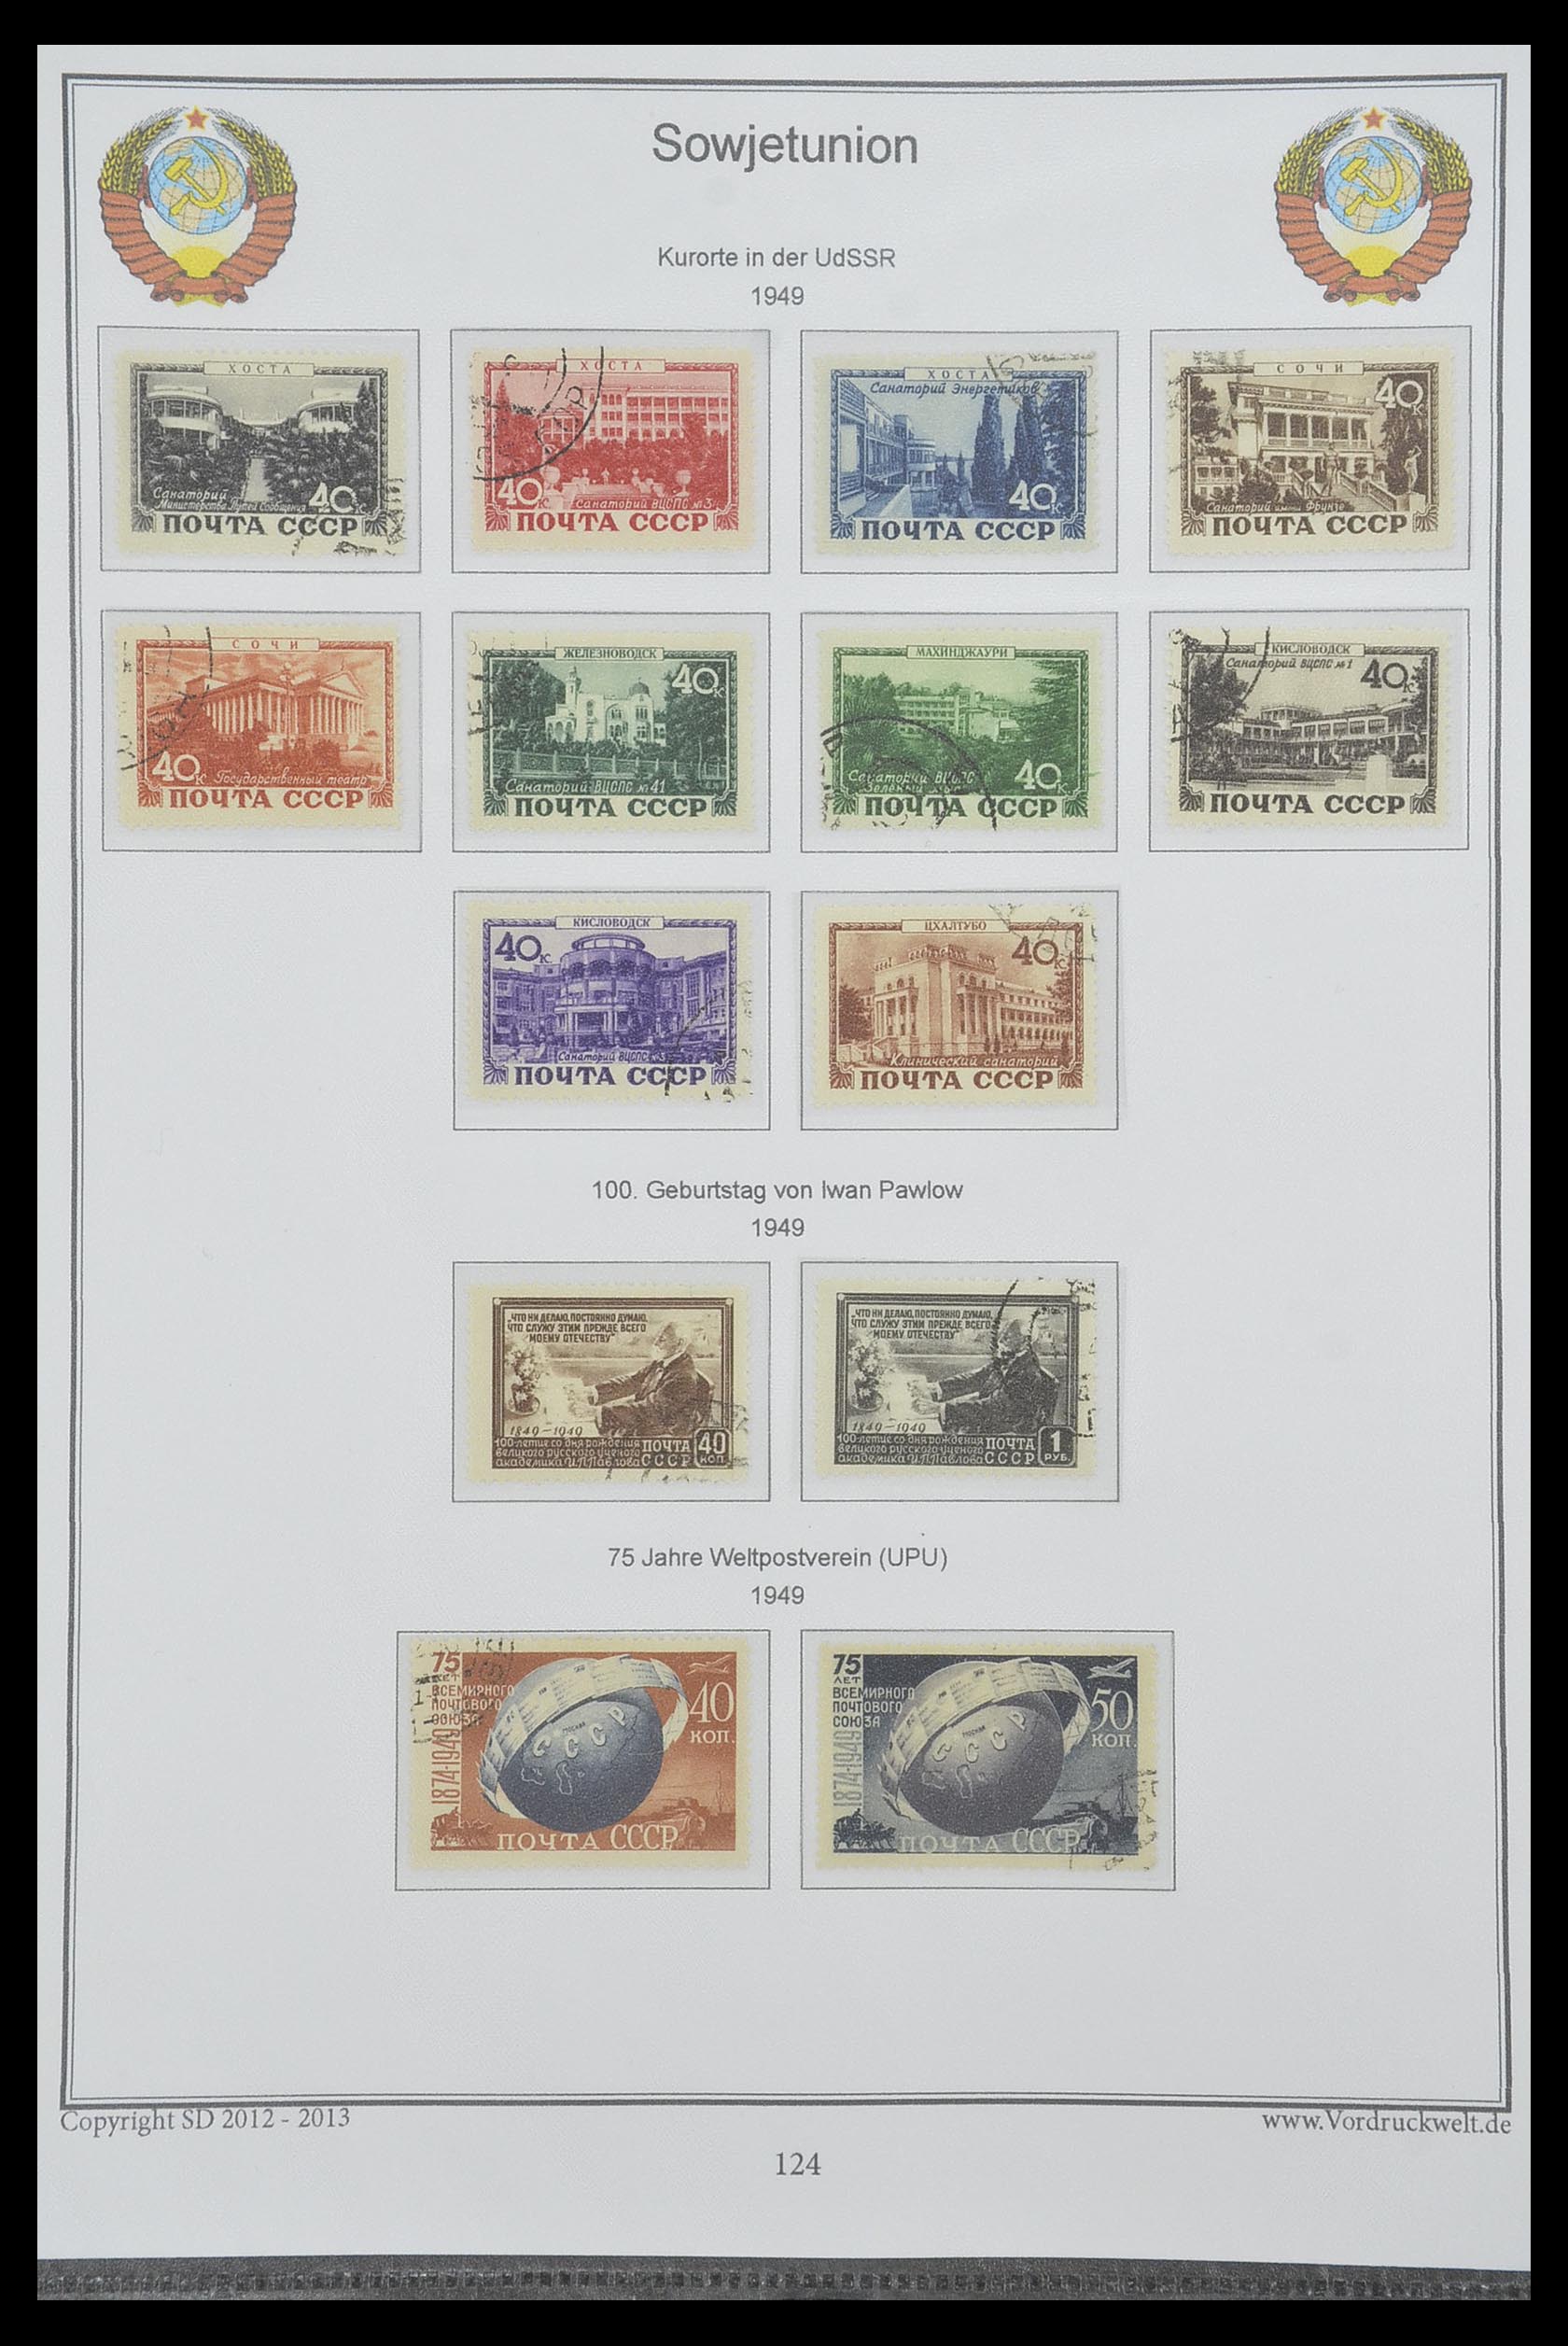 33974 133 - Stamp collection 33974 Russia 1858-1998.